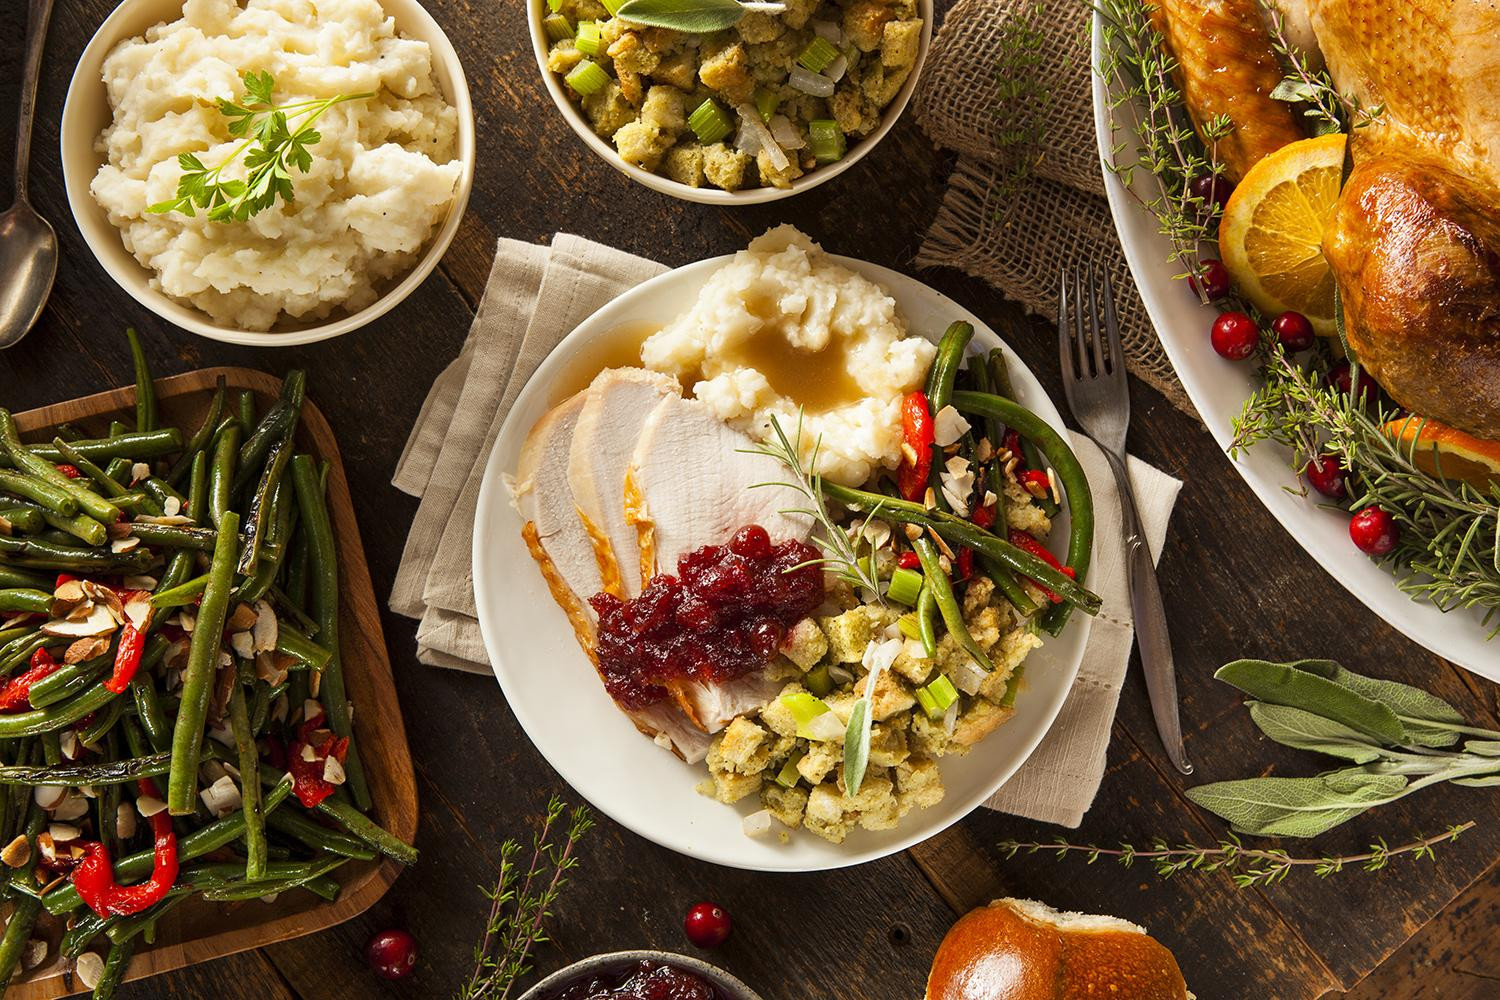 What To Do With Thanksgiving Leftovers
 When Should You Throw Out Thanksgiving Leftovers